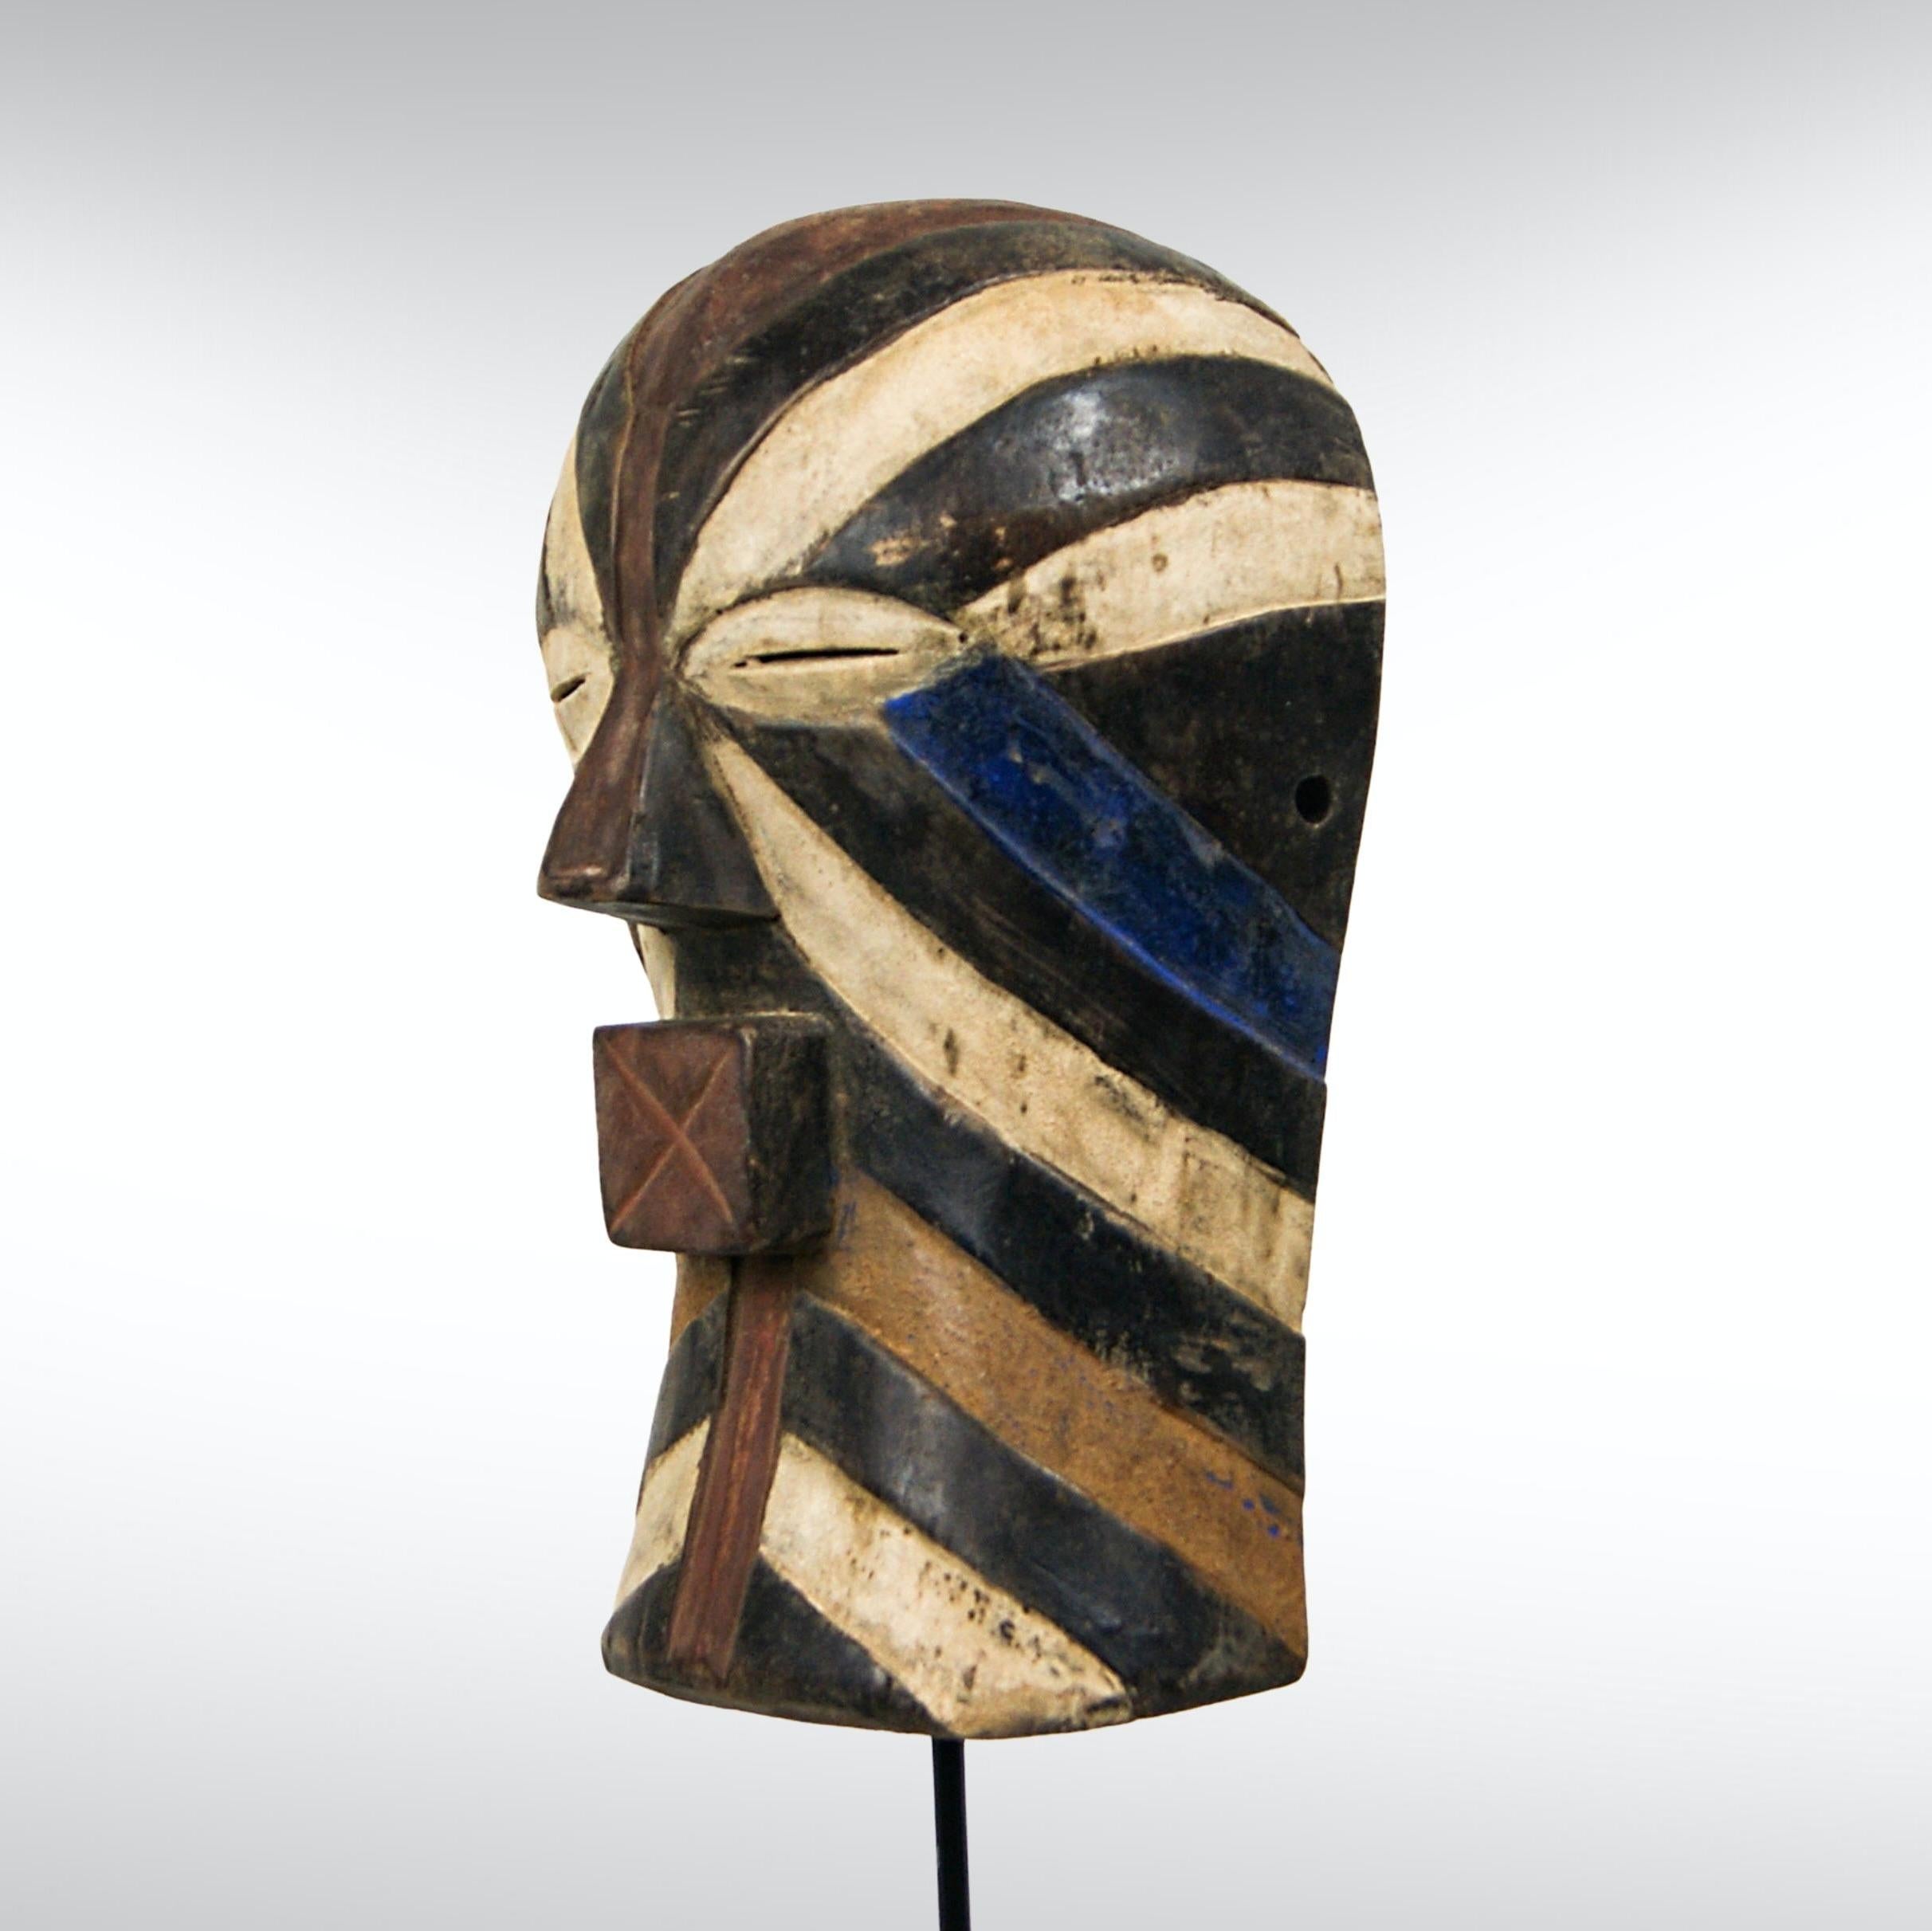 Large sized Songye Female Kifwebe mask from The Congo circa 1920s.
Traditionally, the Kifwebe mask is very symbolic in the Bantu culture of central Africa.
Its striking colours and carving symbolise the battle between good and evil.
Female Kifwebe